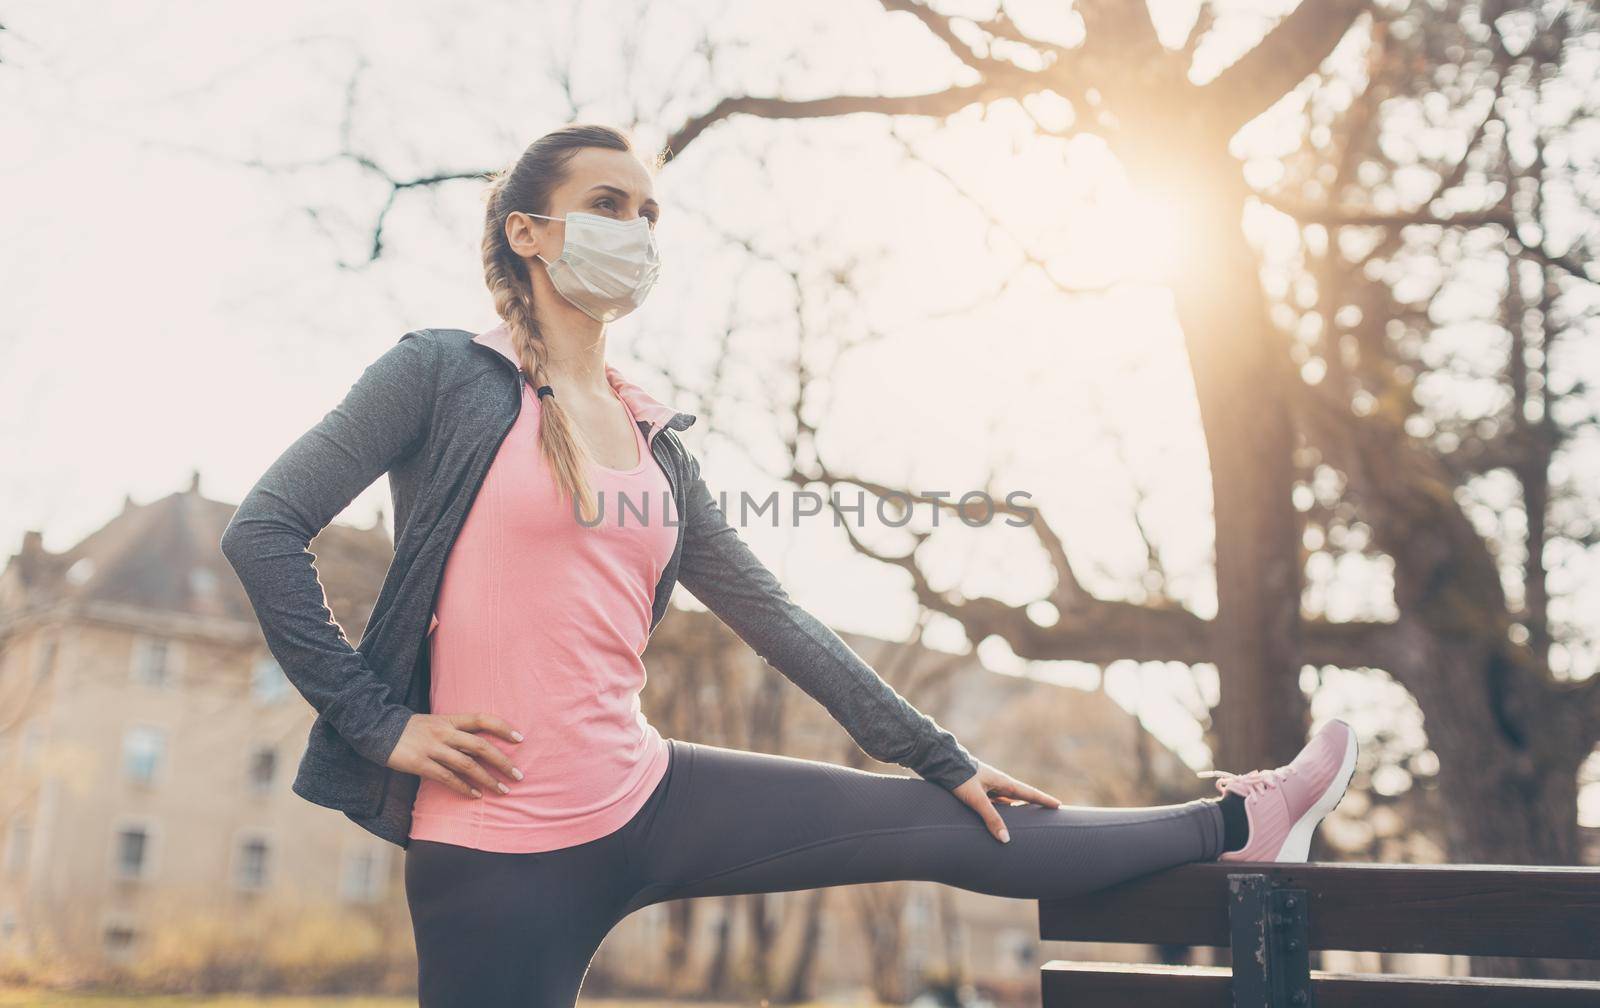 Woman wearing face mask stretching on a park bench outdoors